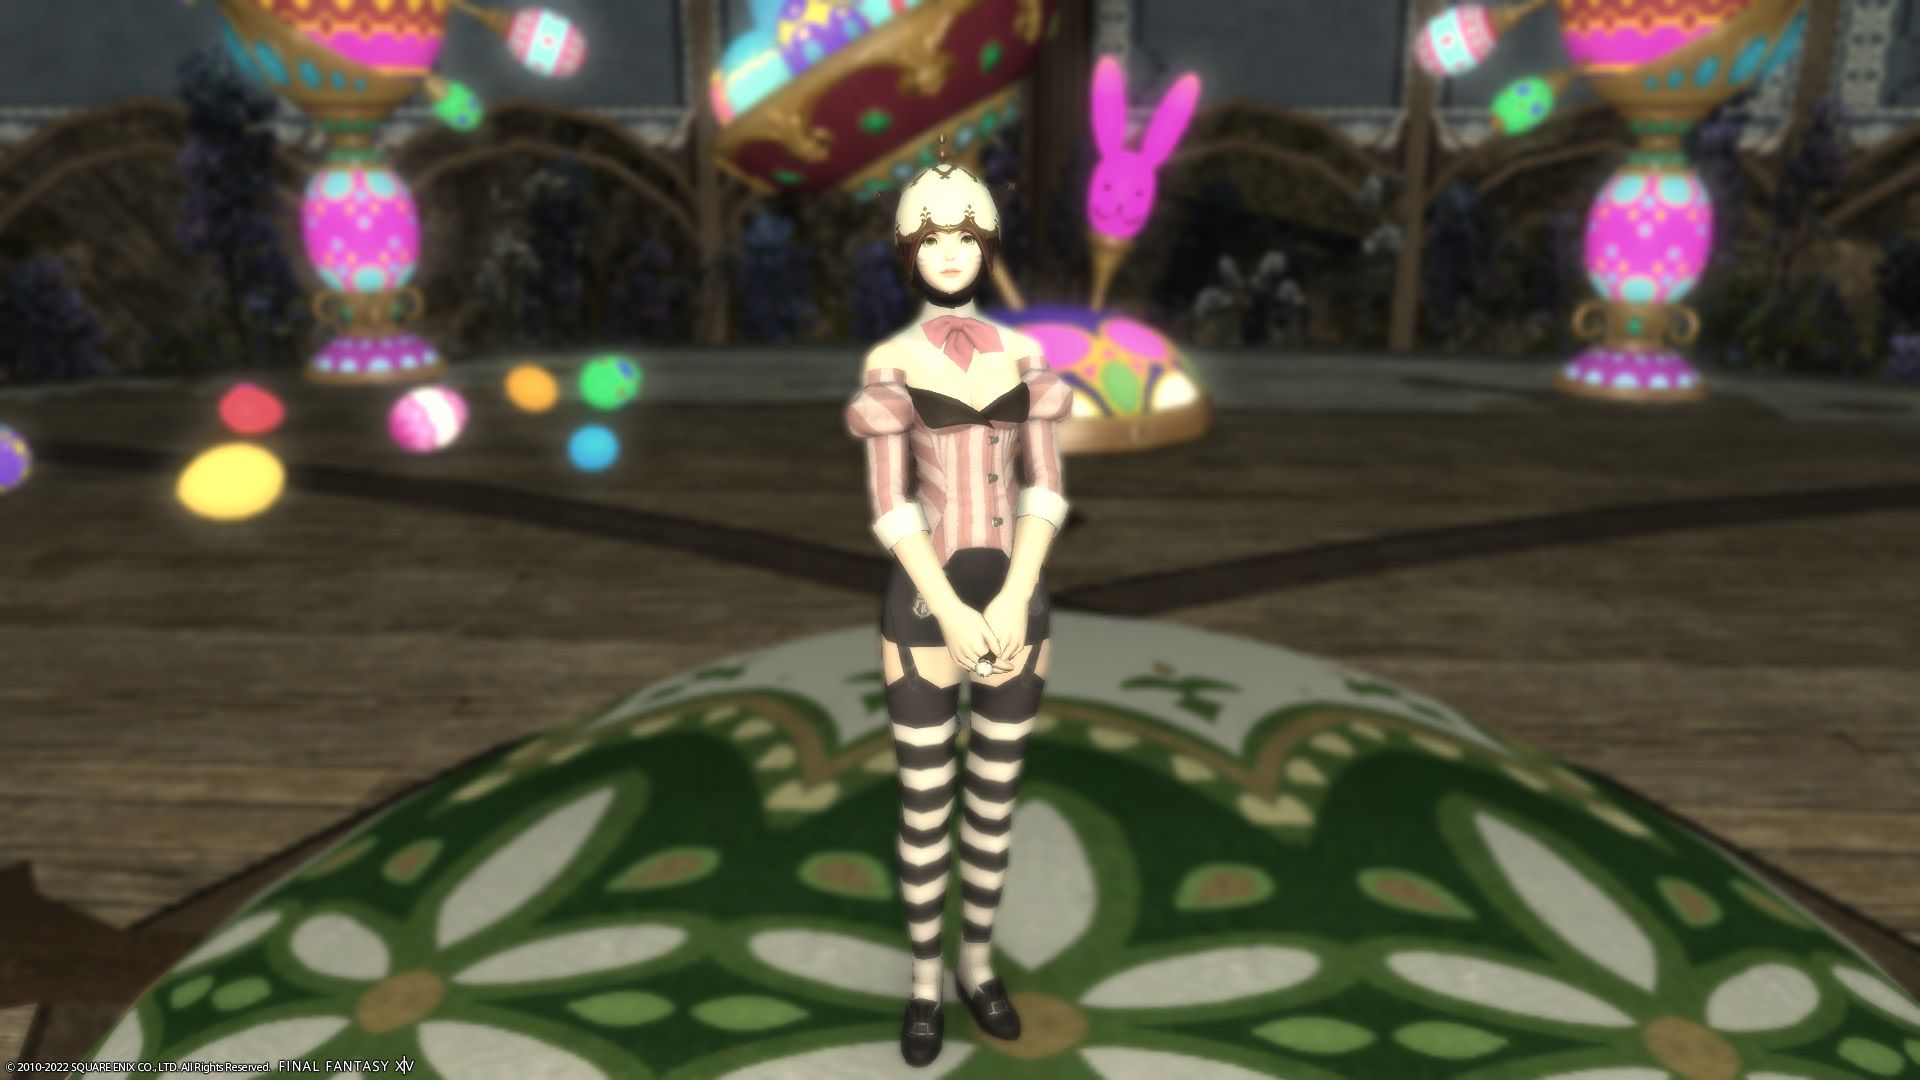 FF14 hatching tide npc with egg costume on